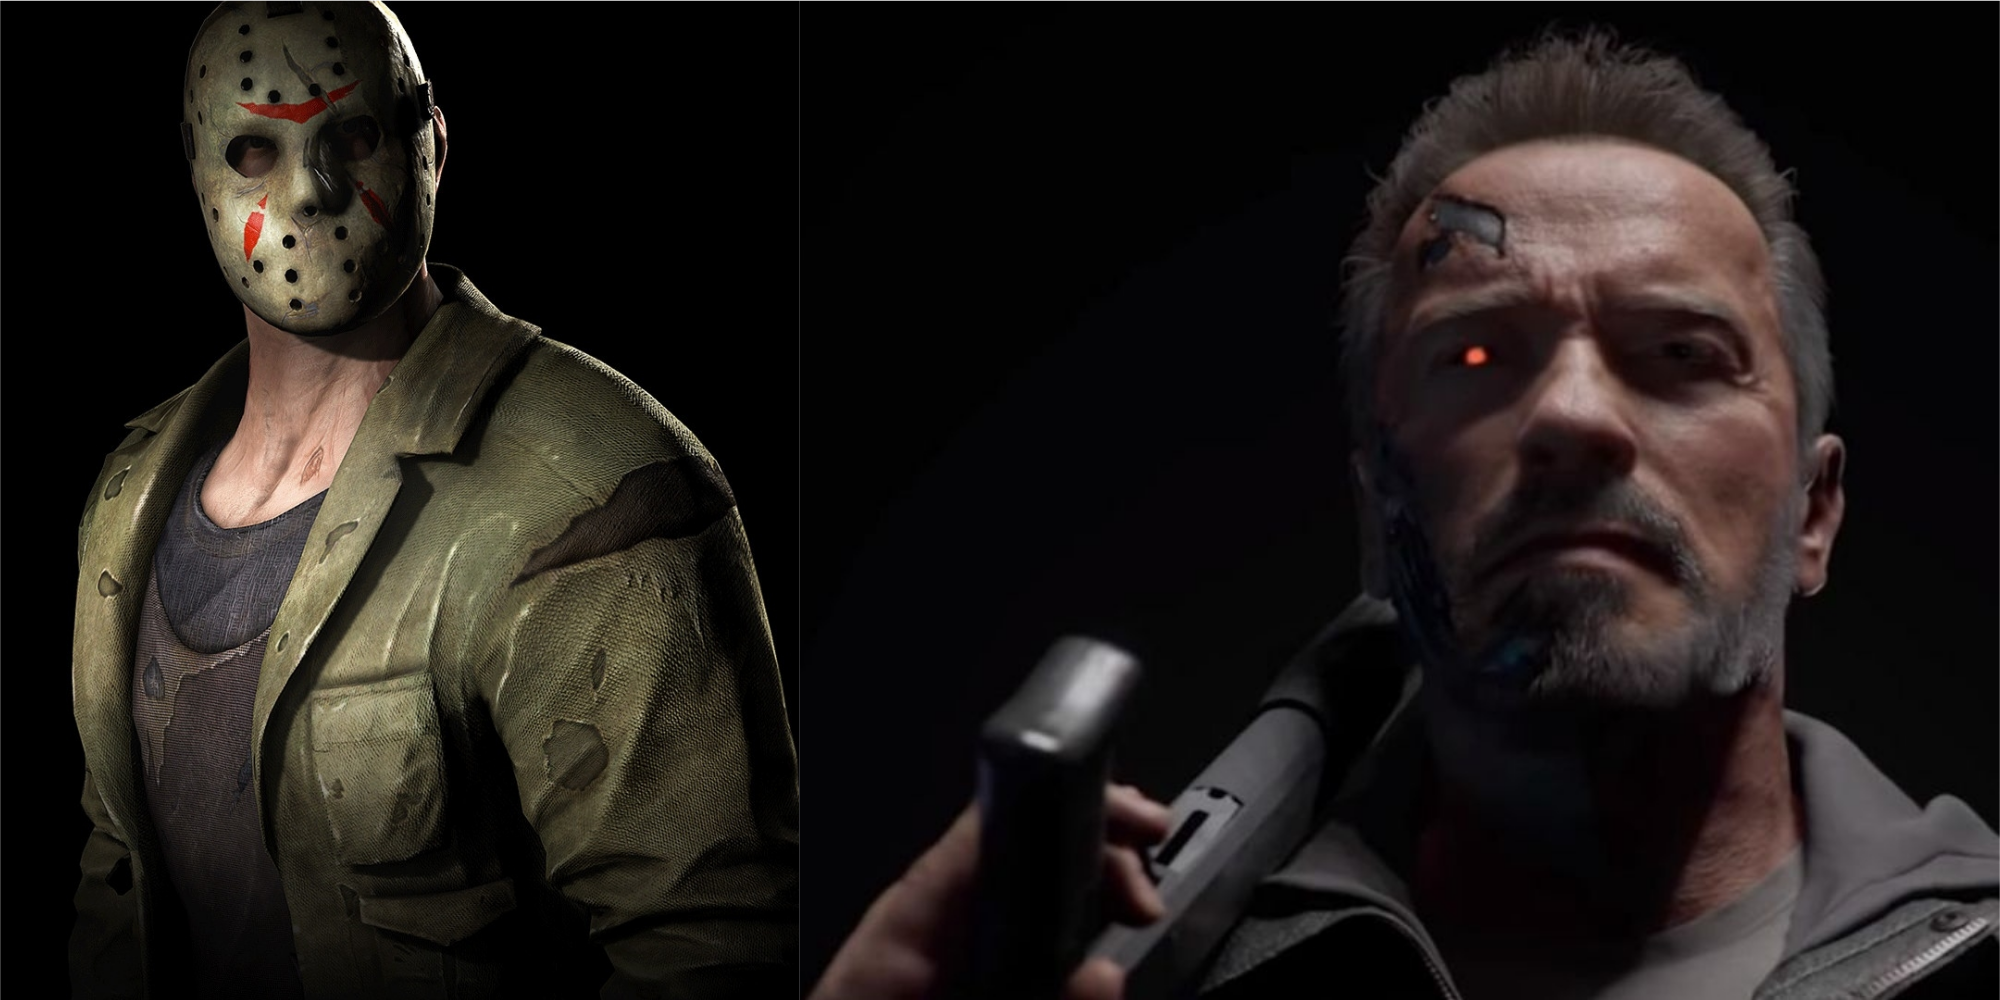 An image of the Terminator and Jason